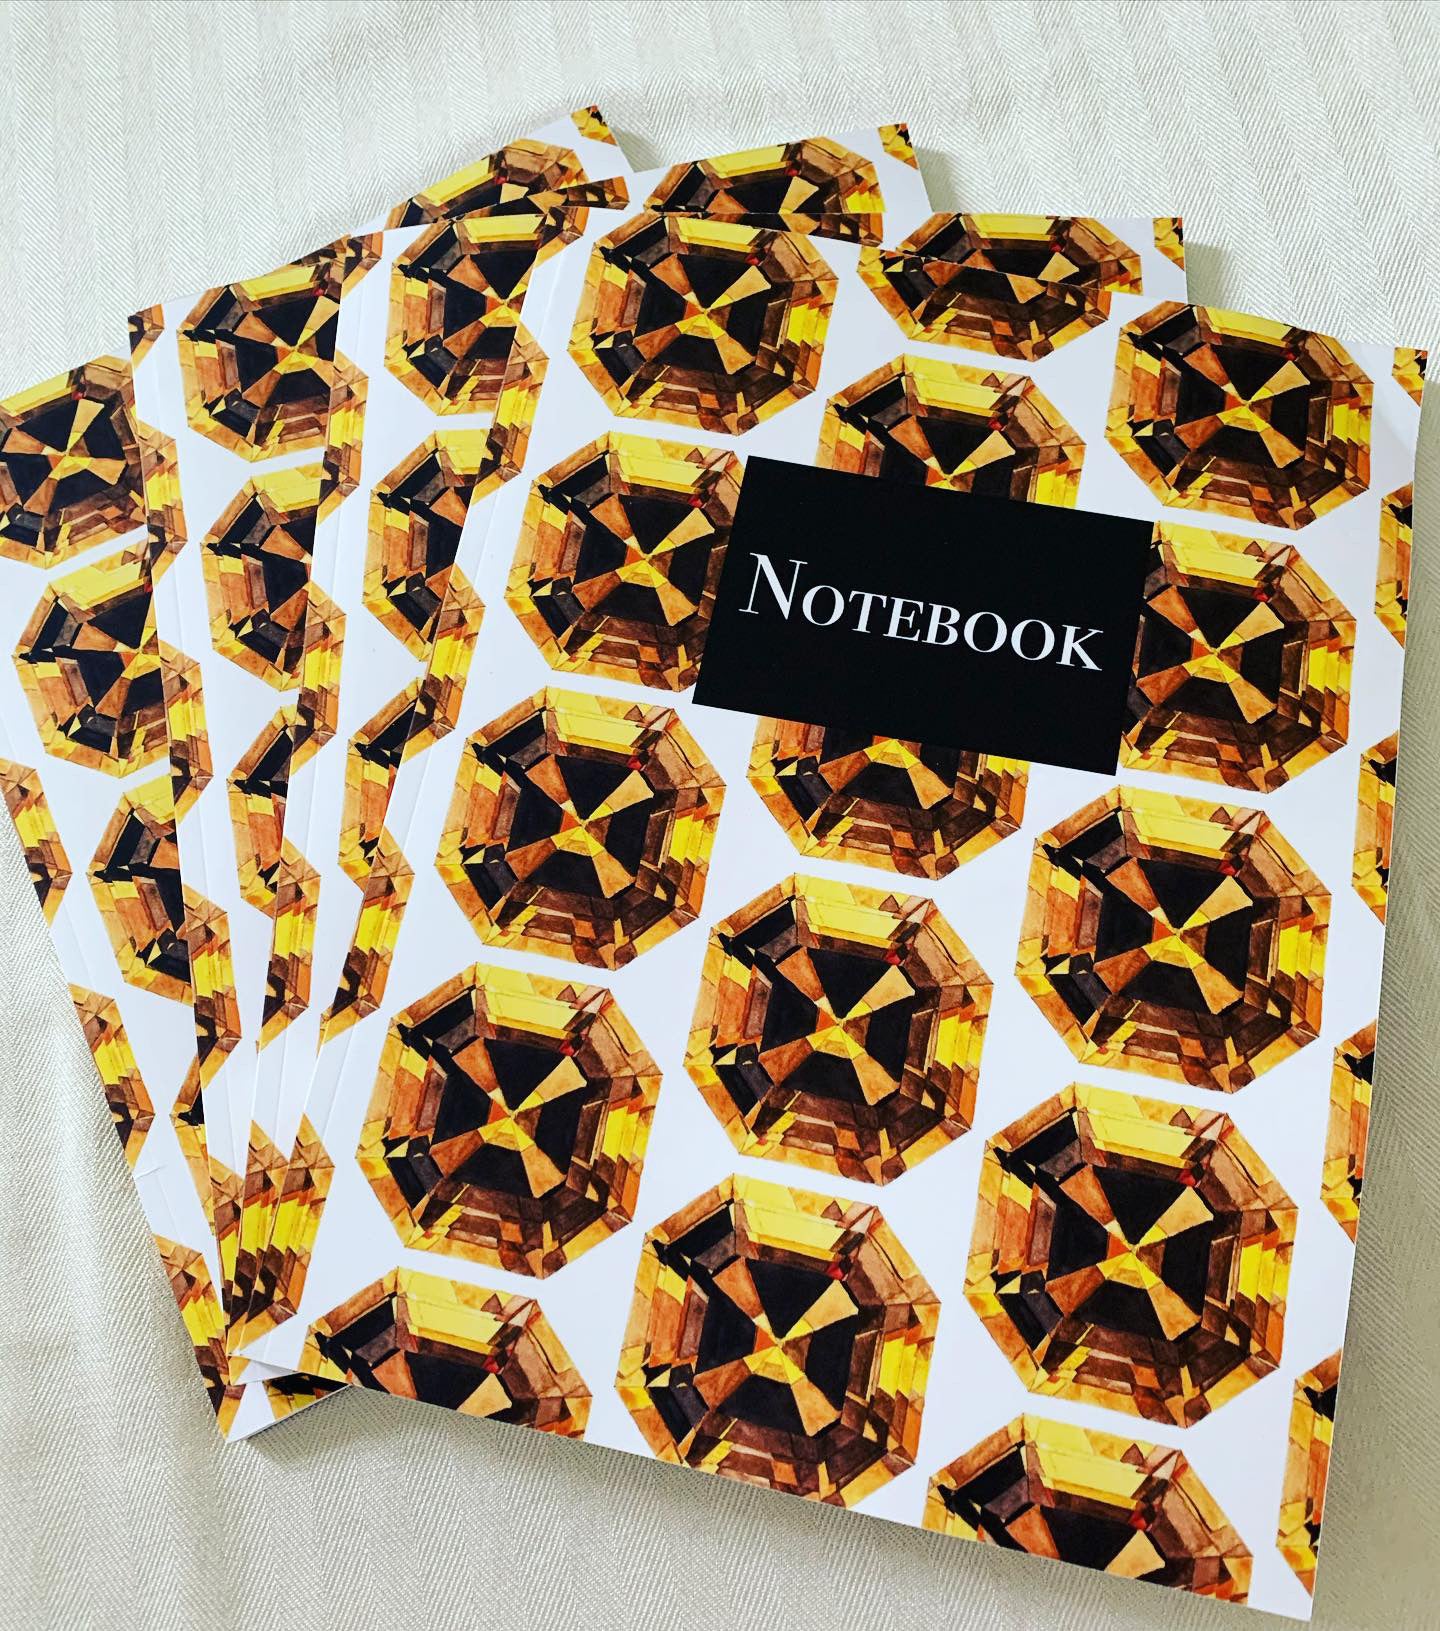 Notebook: Citrine Print Composition Notebook - College Ruled 110 Pages - Large 8.5 x 11 - Amaria Studio